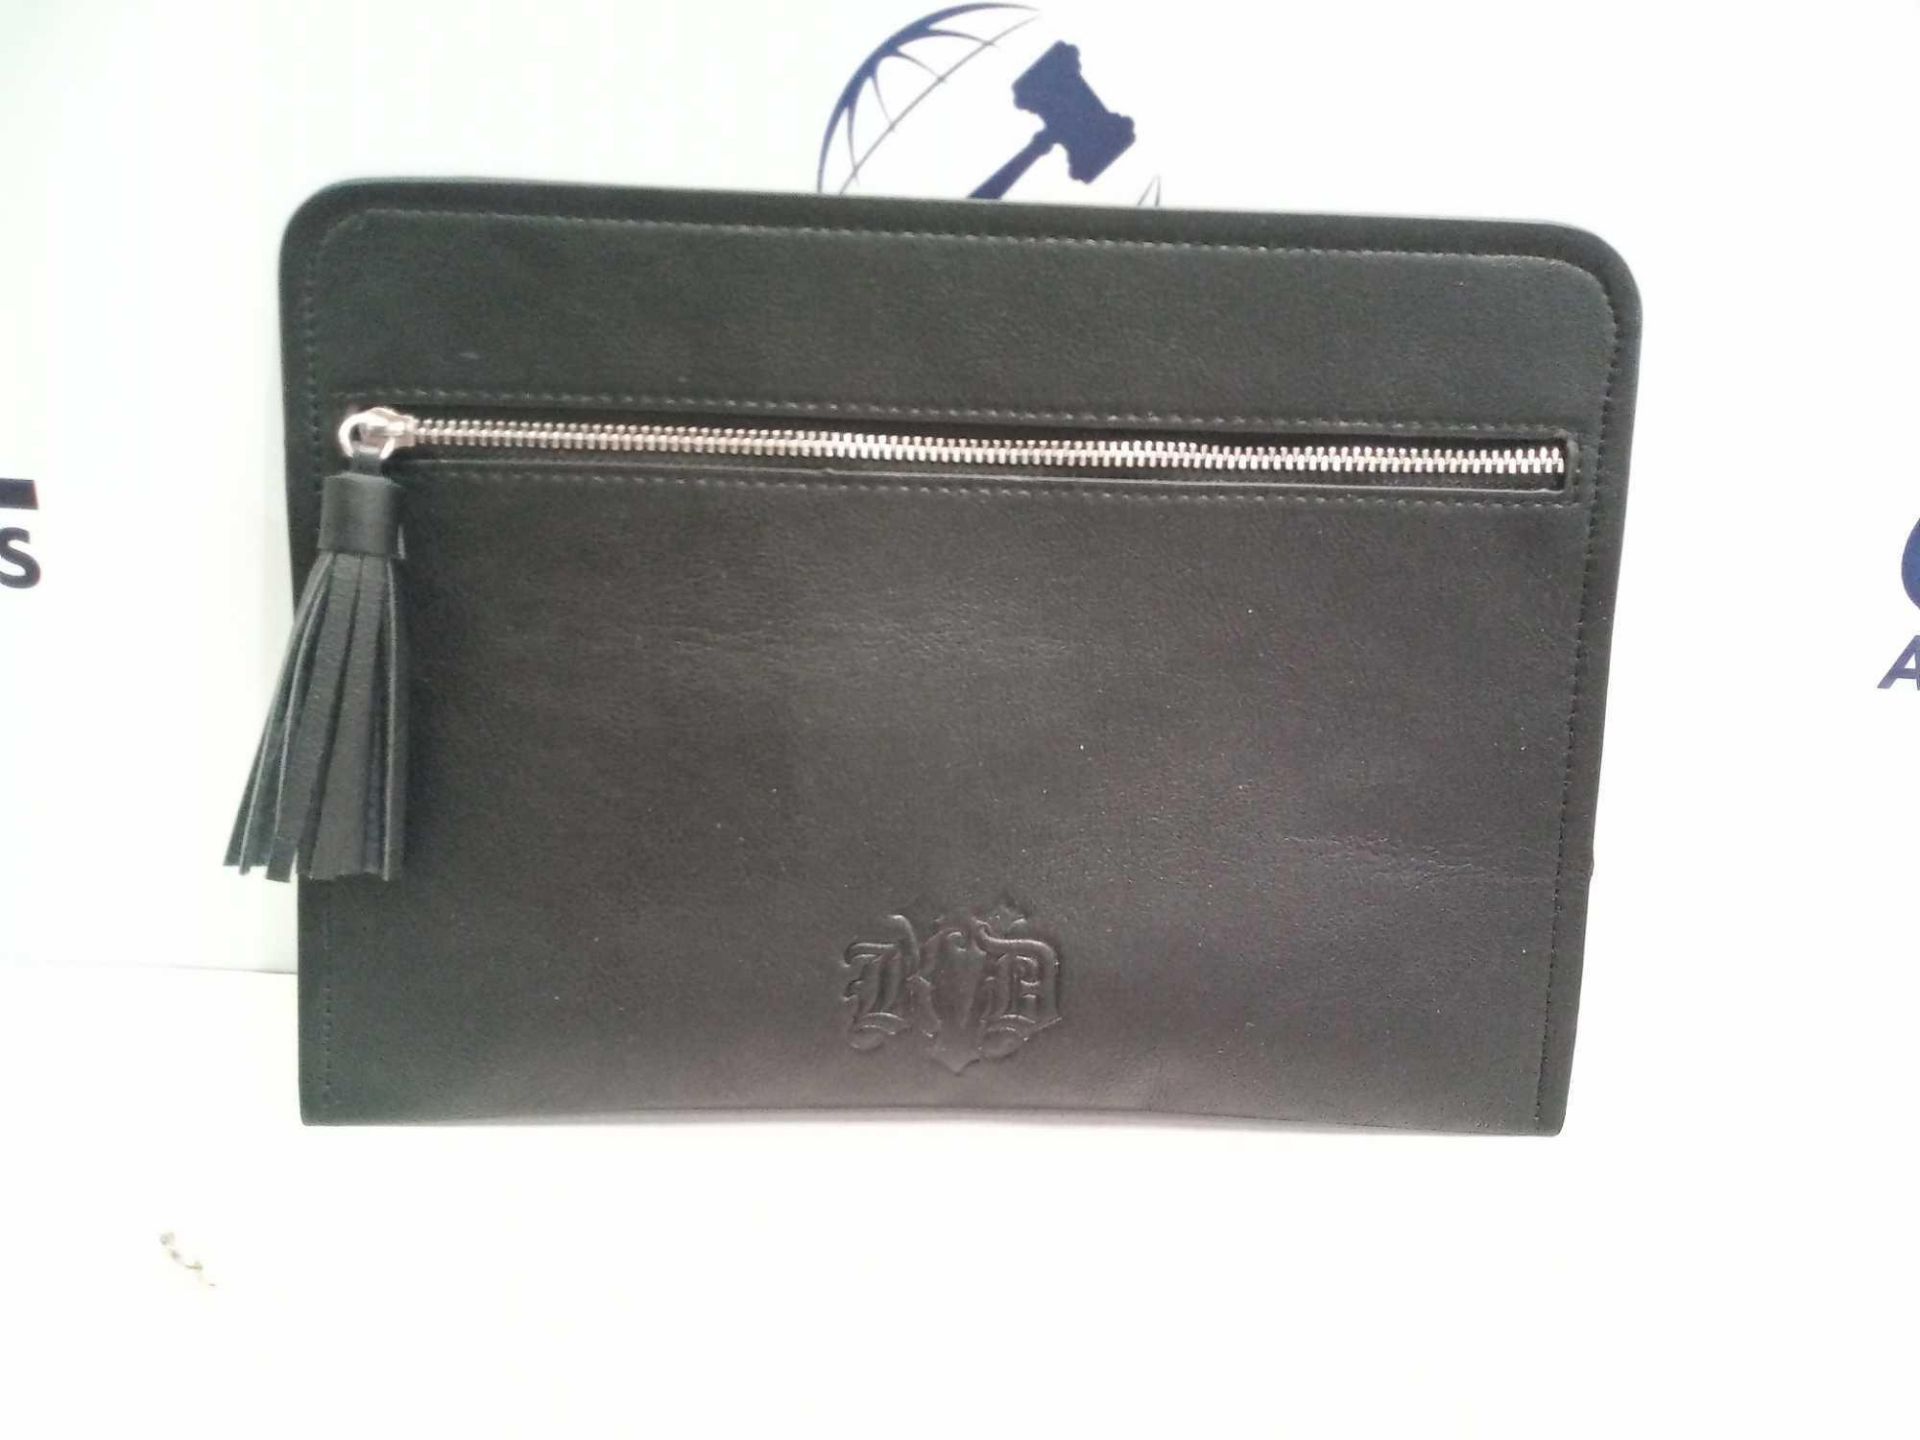 Rrp £50 Lot To Contain 2 Assorted Bags To Include A Navy Suede Clutch Bag And A Black Leather Hold I - Image 2 of 2